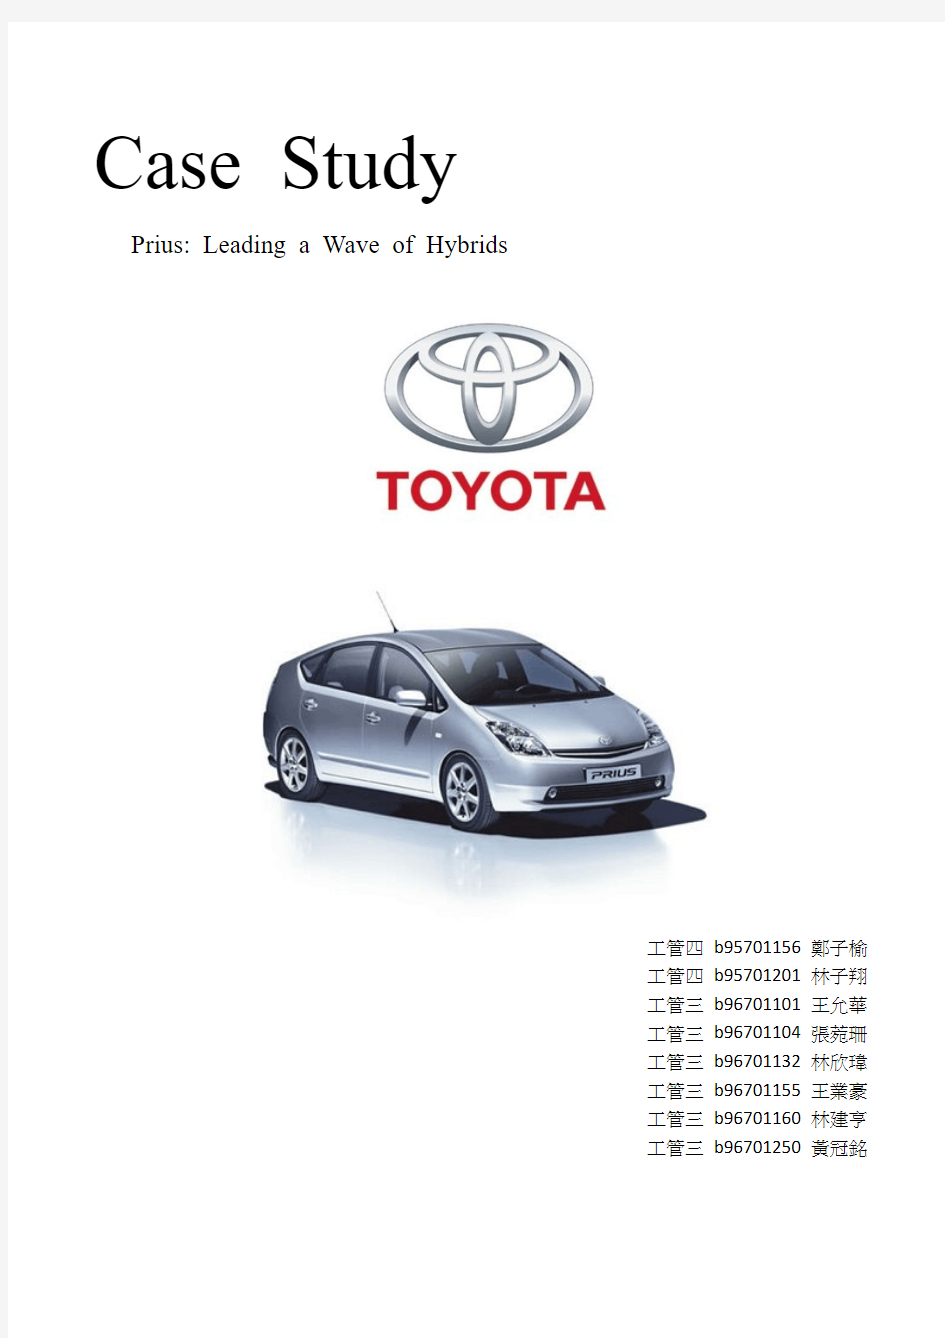 Toyota case study_Prius_leading a wave of hybrids